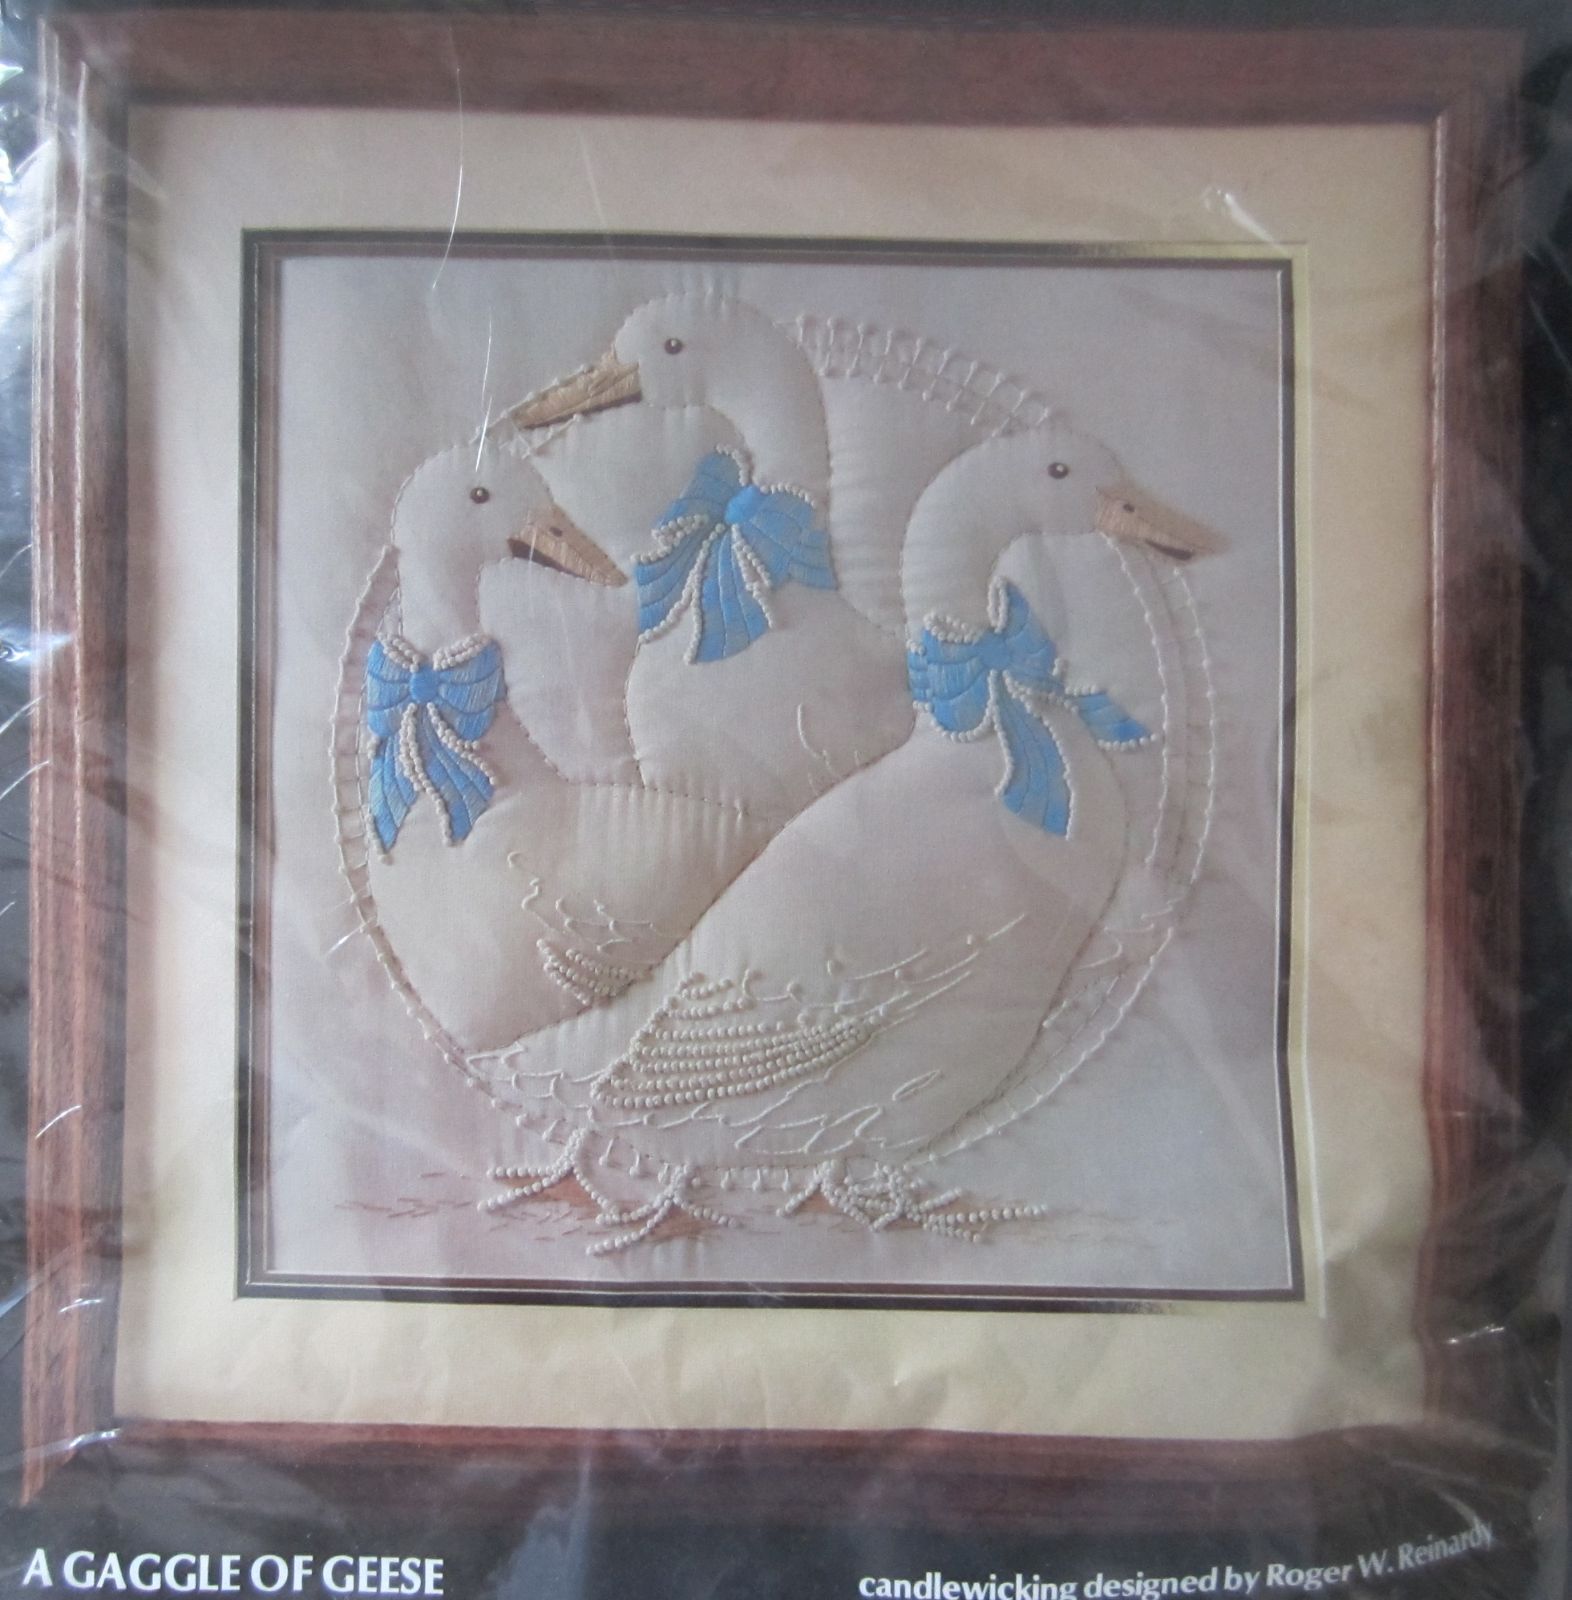 Vtg 1983 Monarch Horizons A Gaggle of Geese Candlewick Embroidery KIT 14" x 14" - $17.99